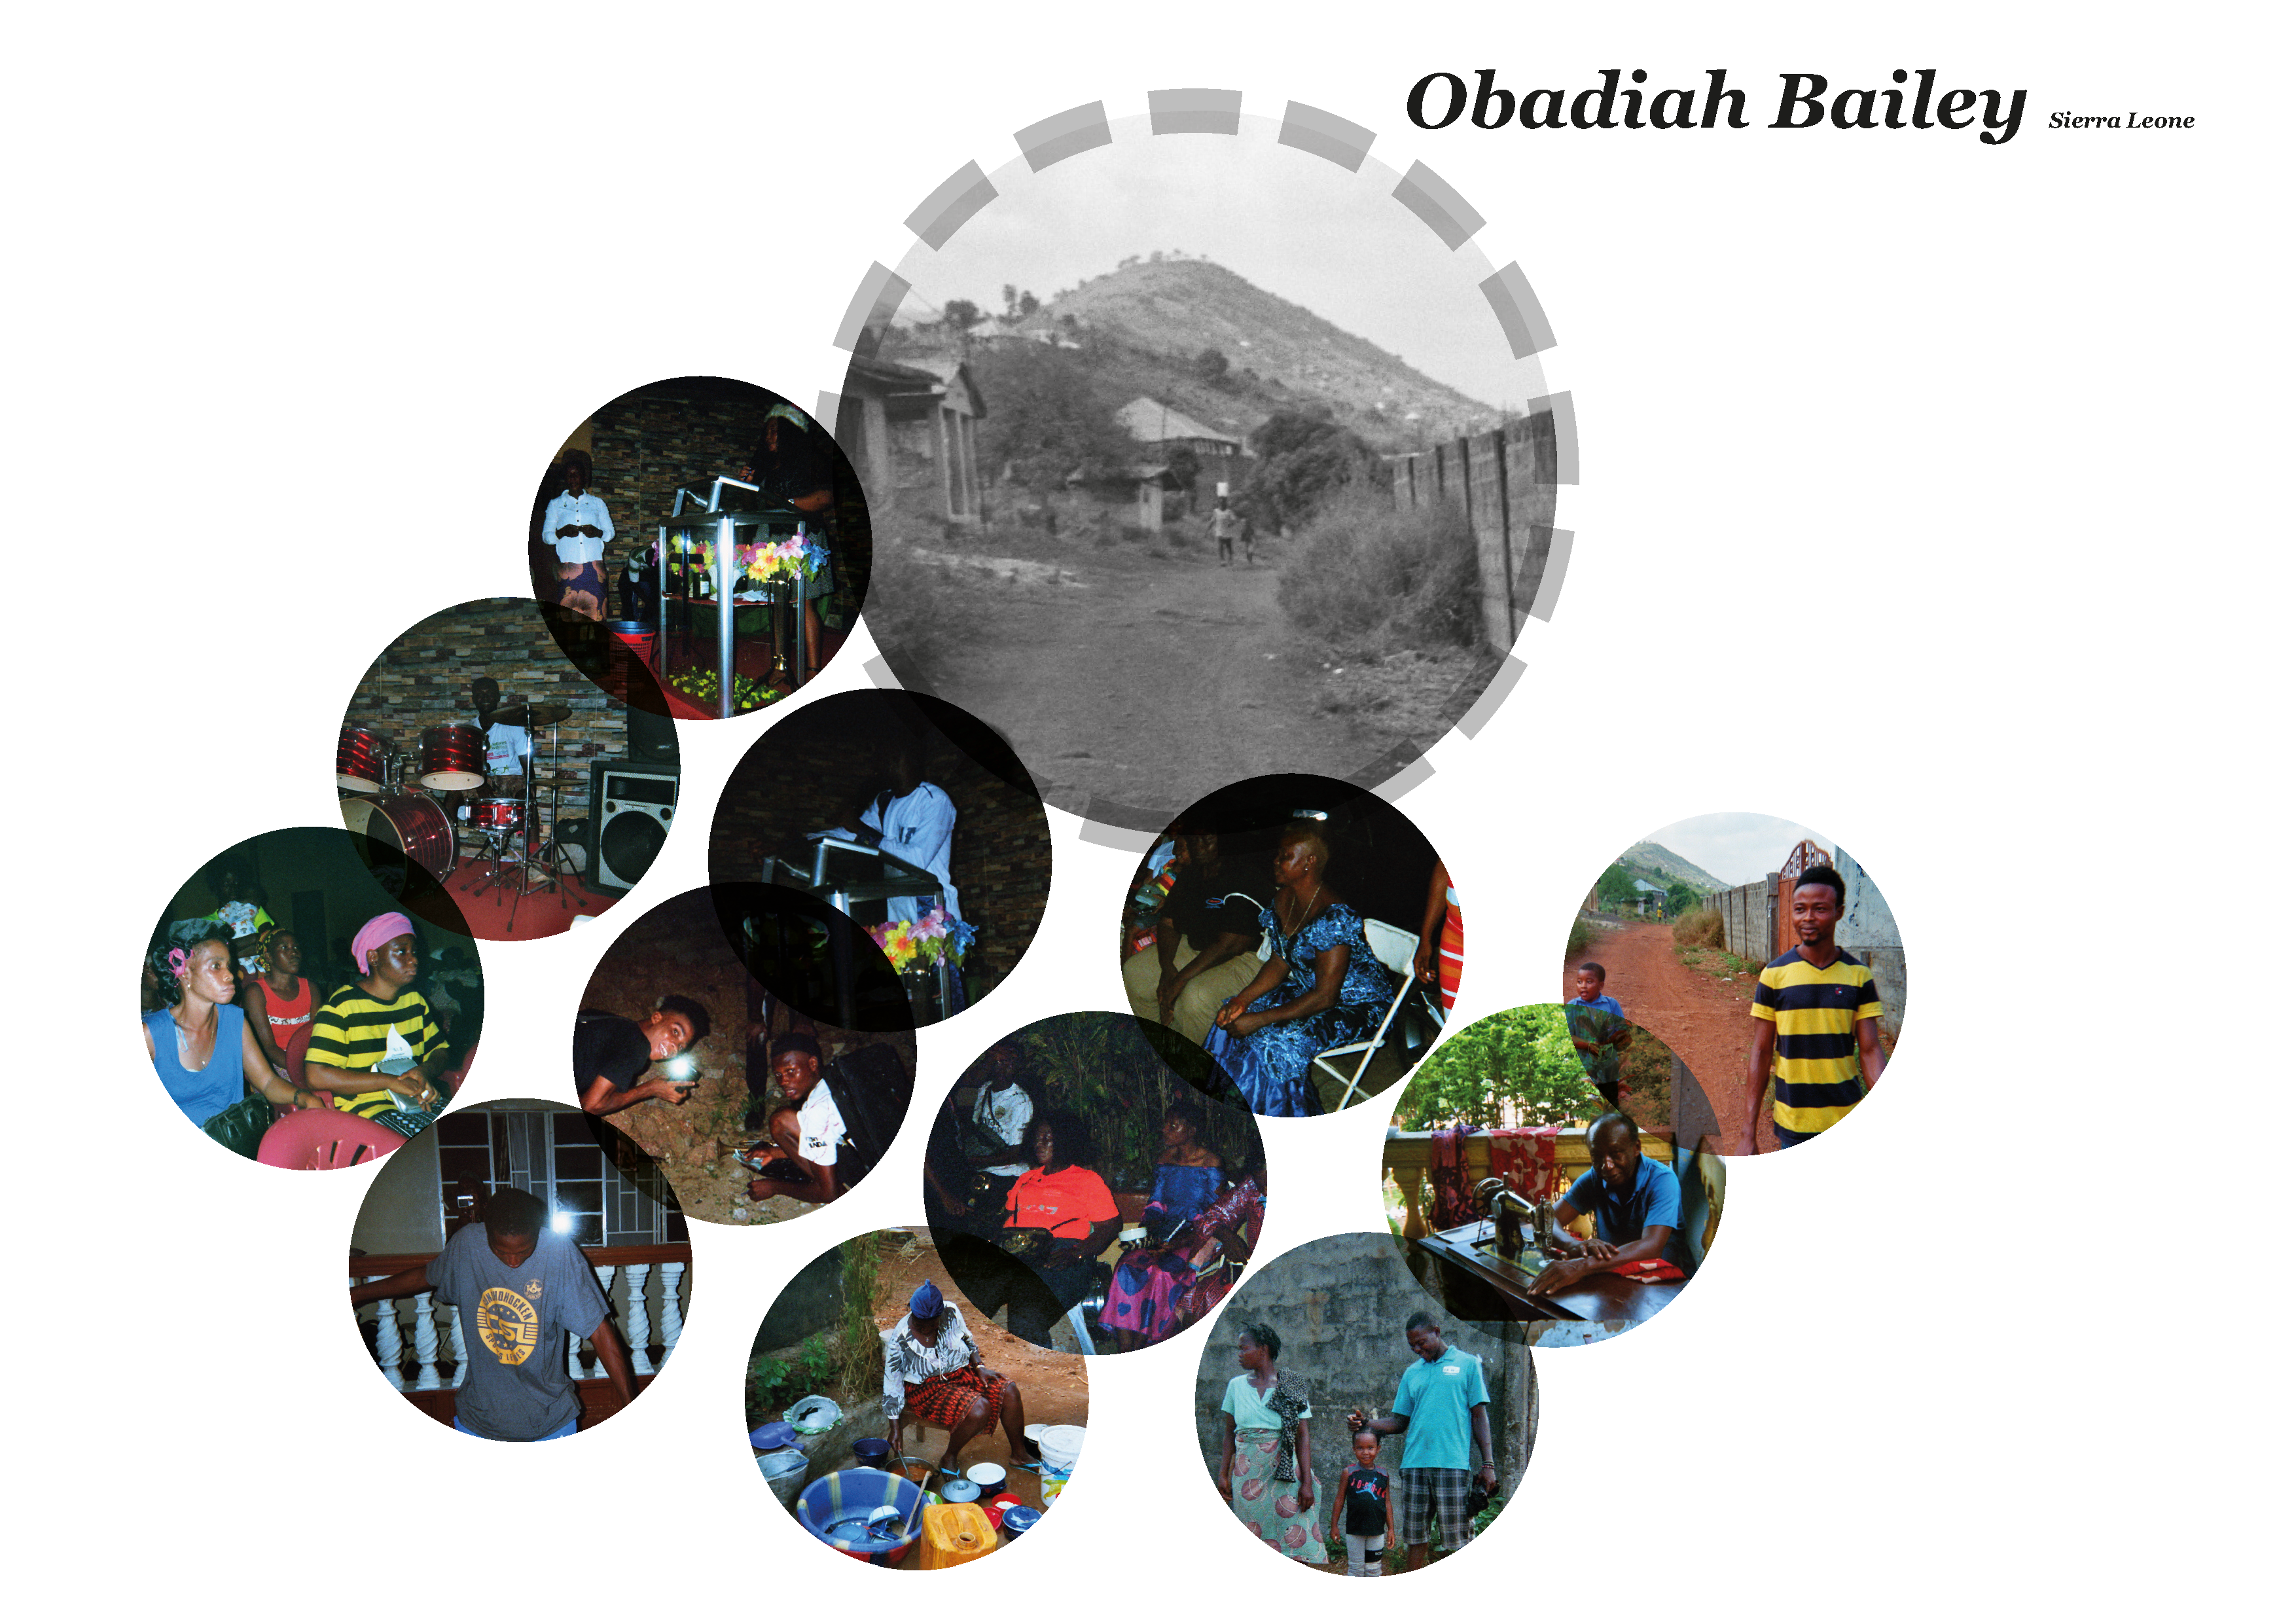 Collage of pictures of religion and peace images in Sierra Leona by Obadiah Bailey